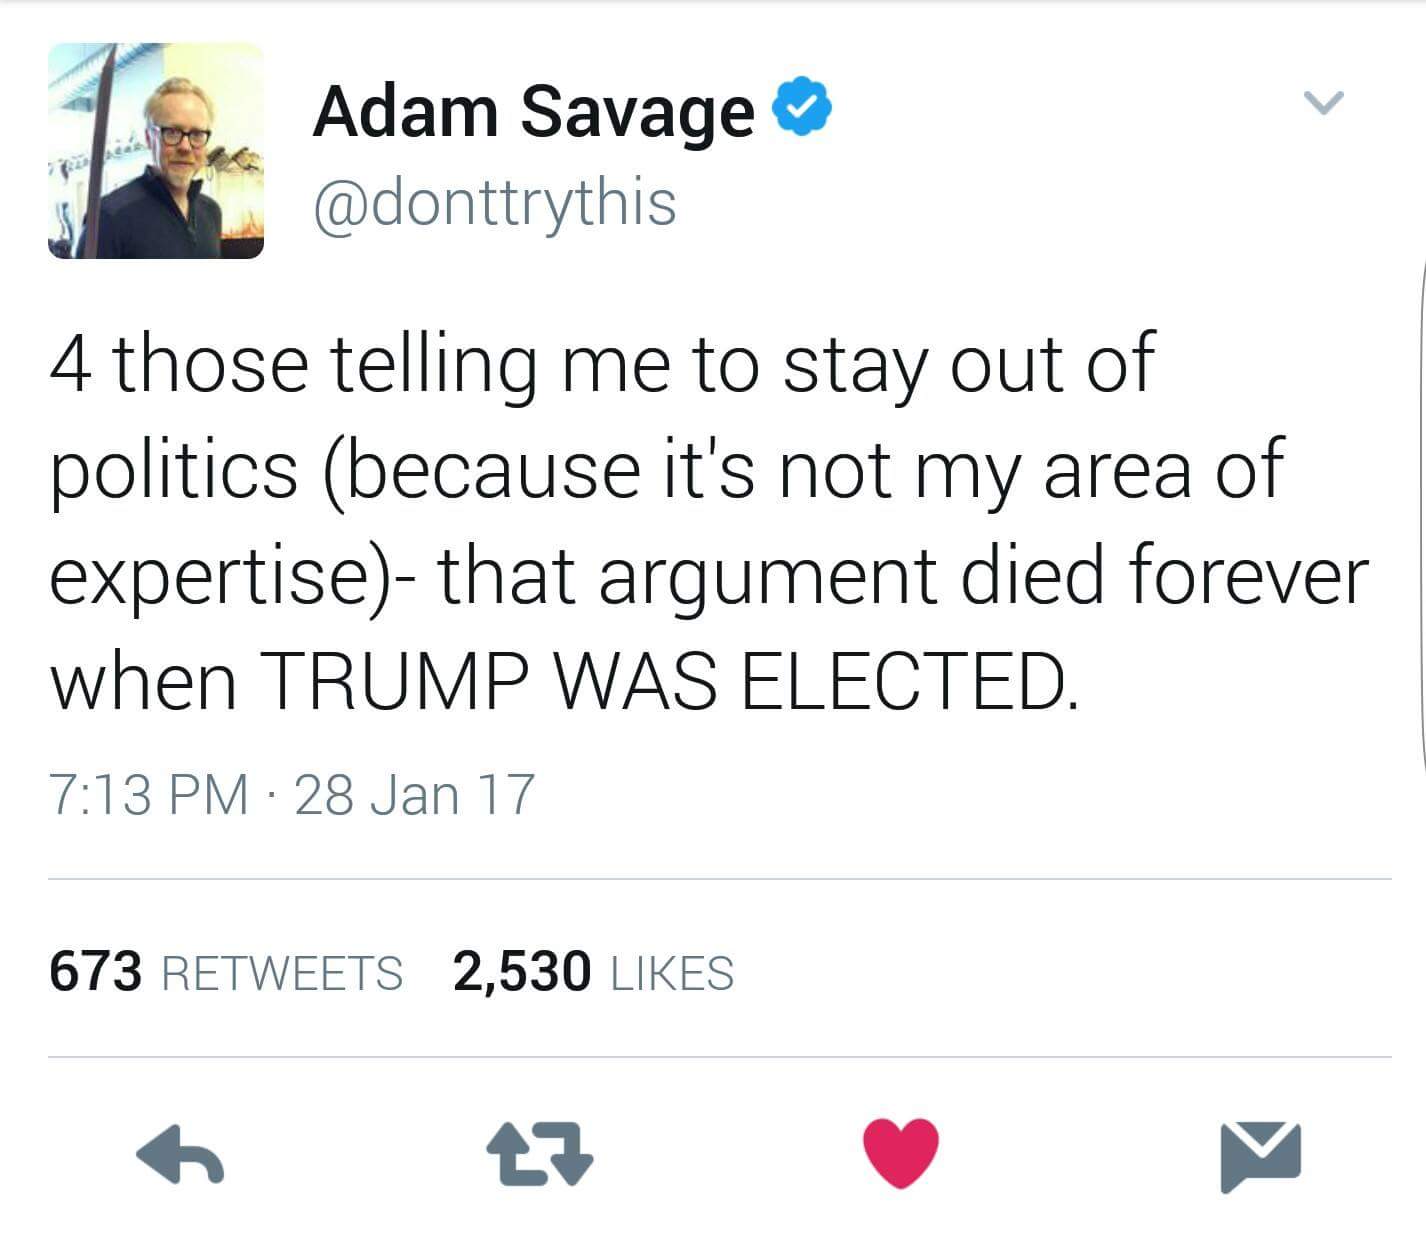 memes  - angle - Adam Savage 4 those telling me to stay out of politics because it's not my area of expertise that argument died forever when Trump Was Elected. 28 Jan 17 673 2,530